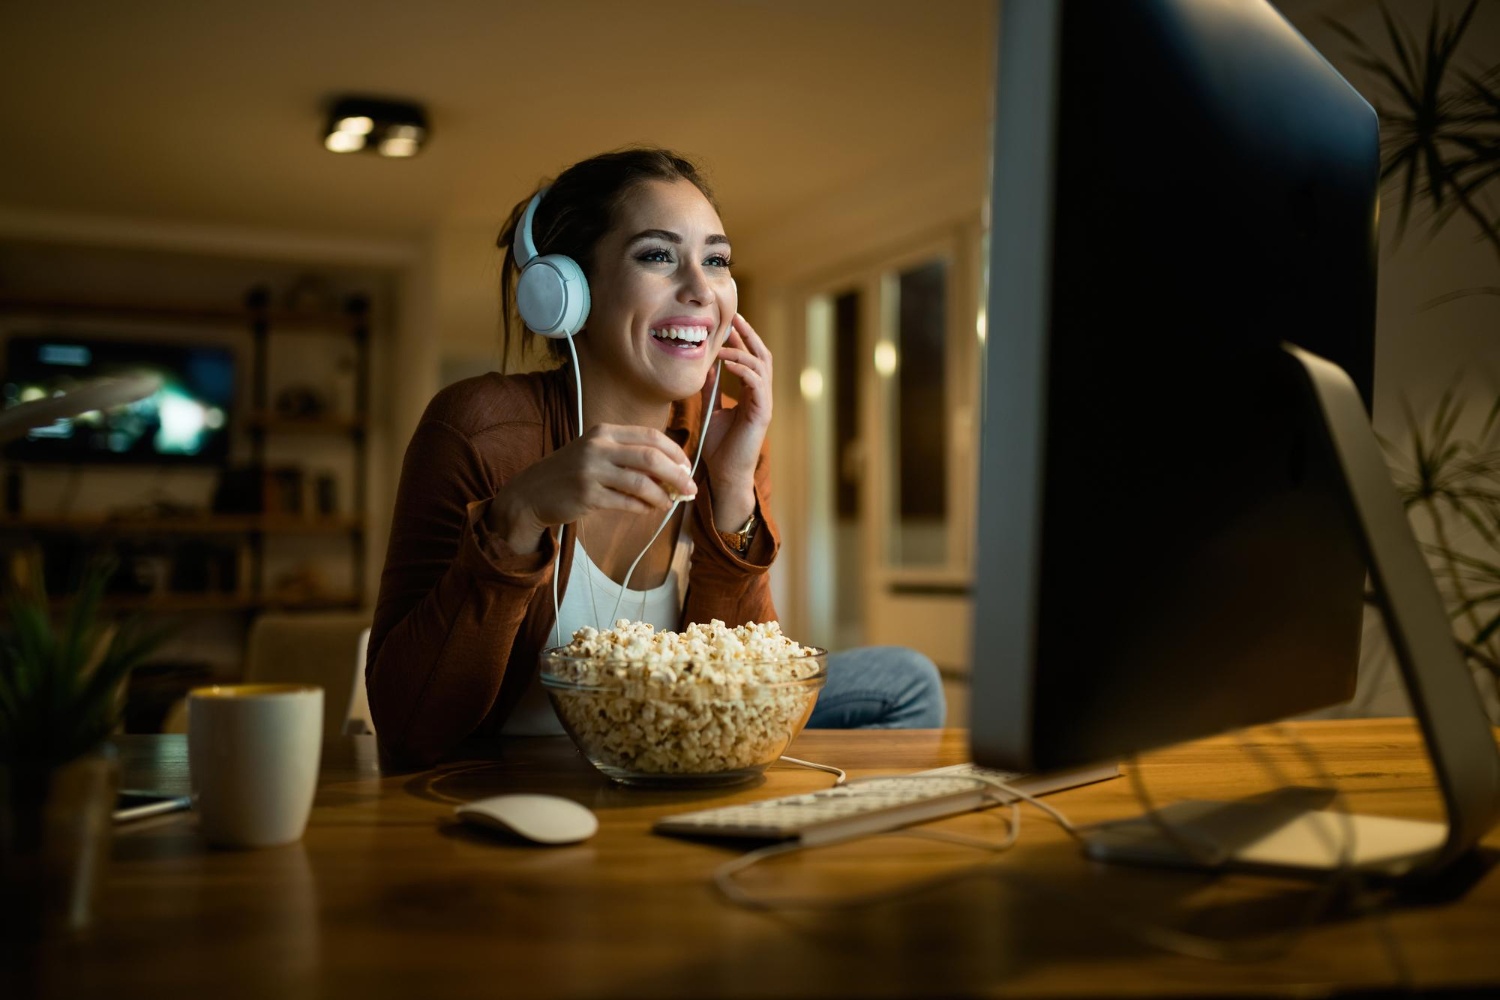 Woman eating popcorn while watching show on computer